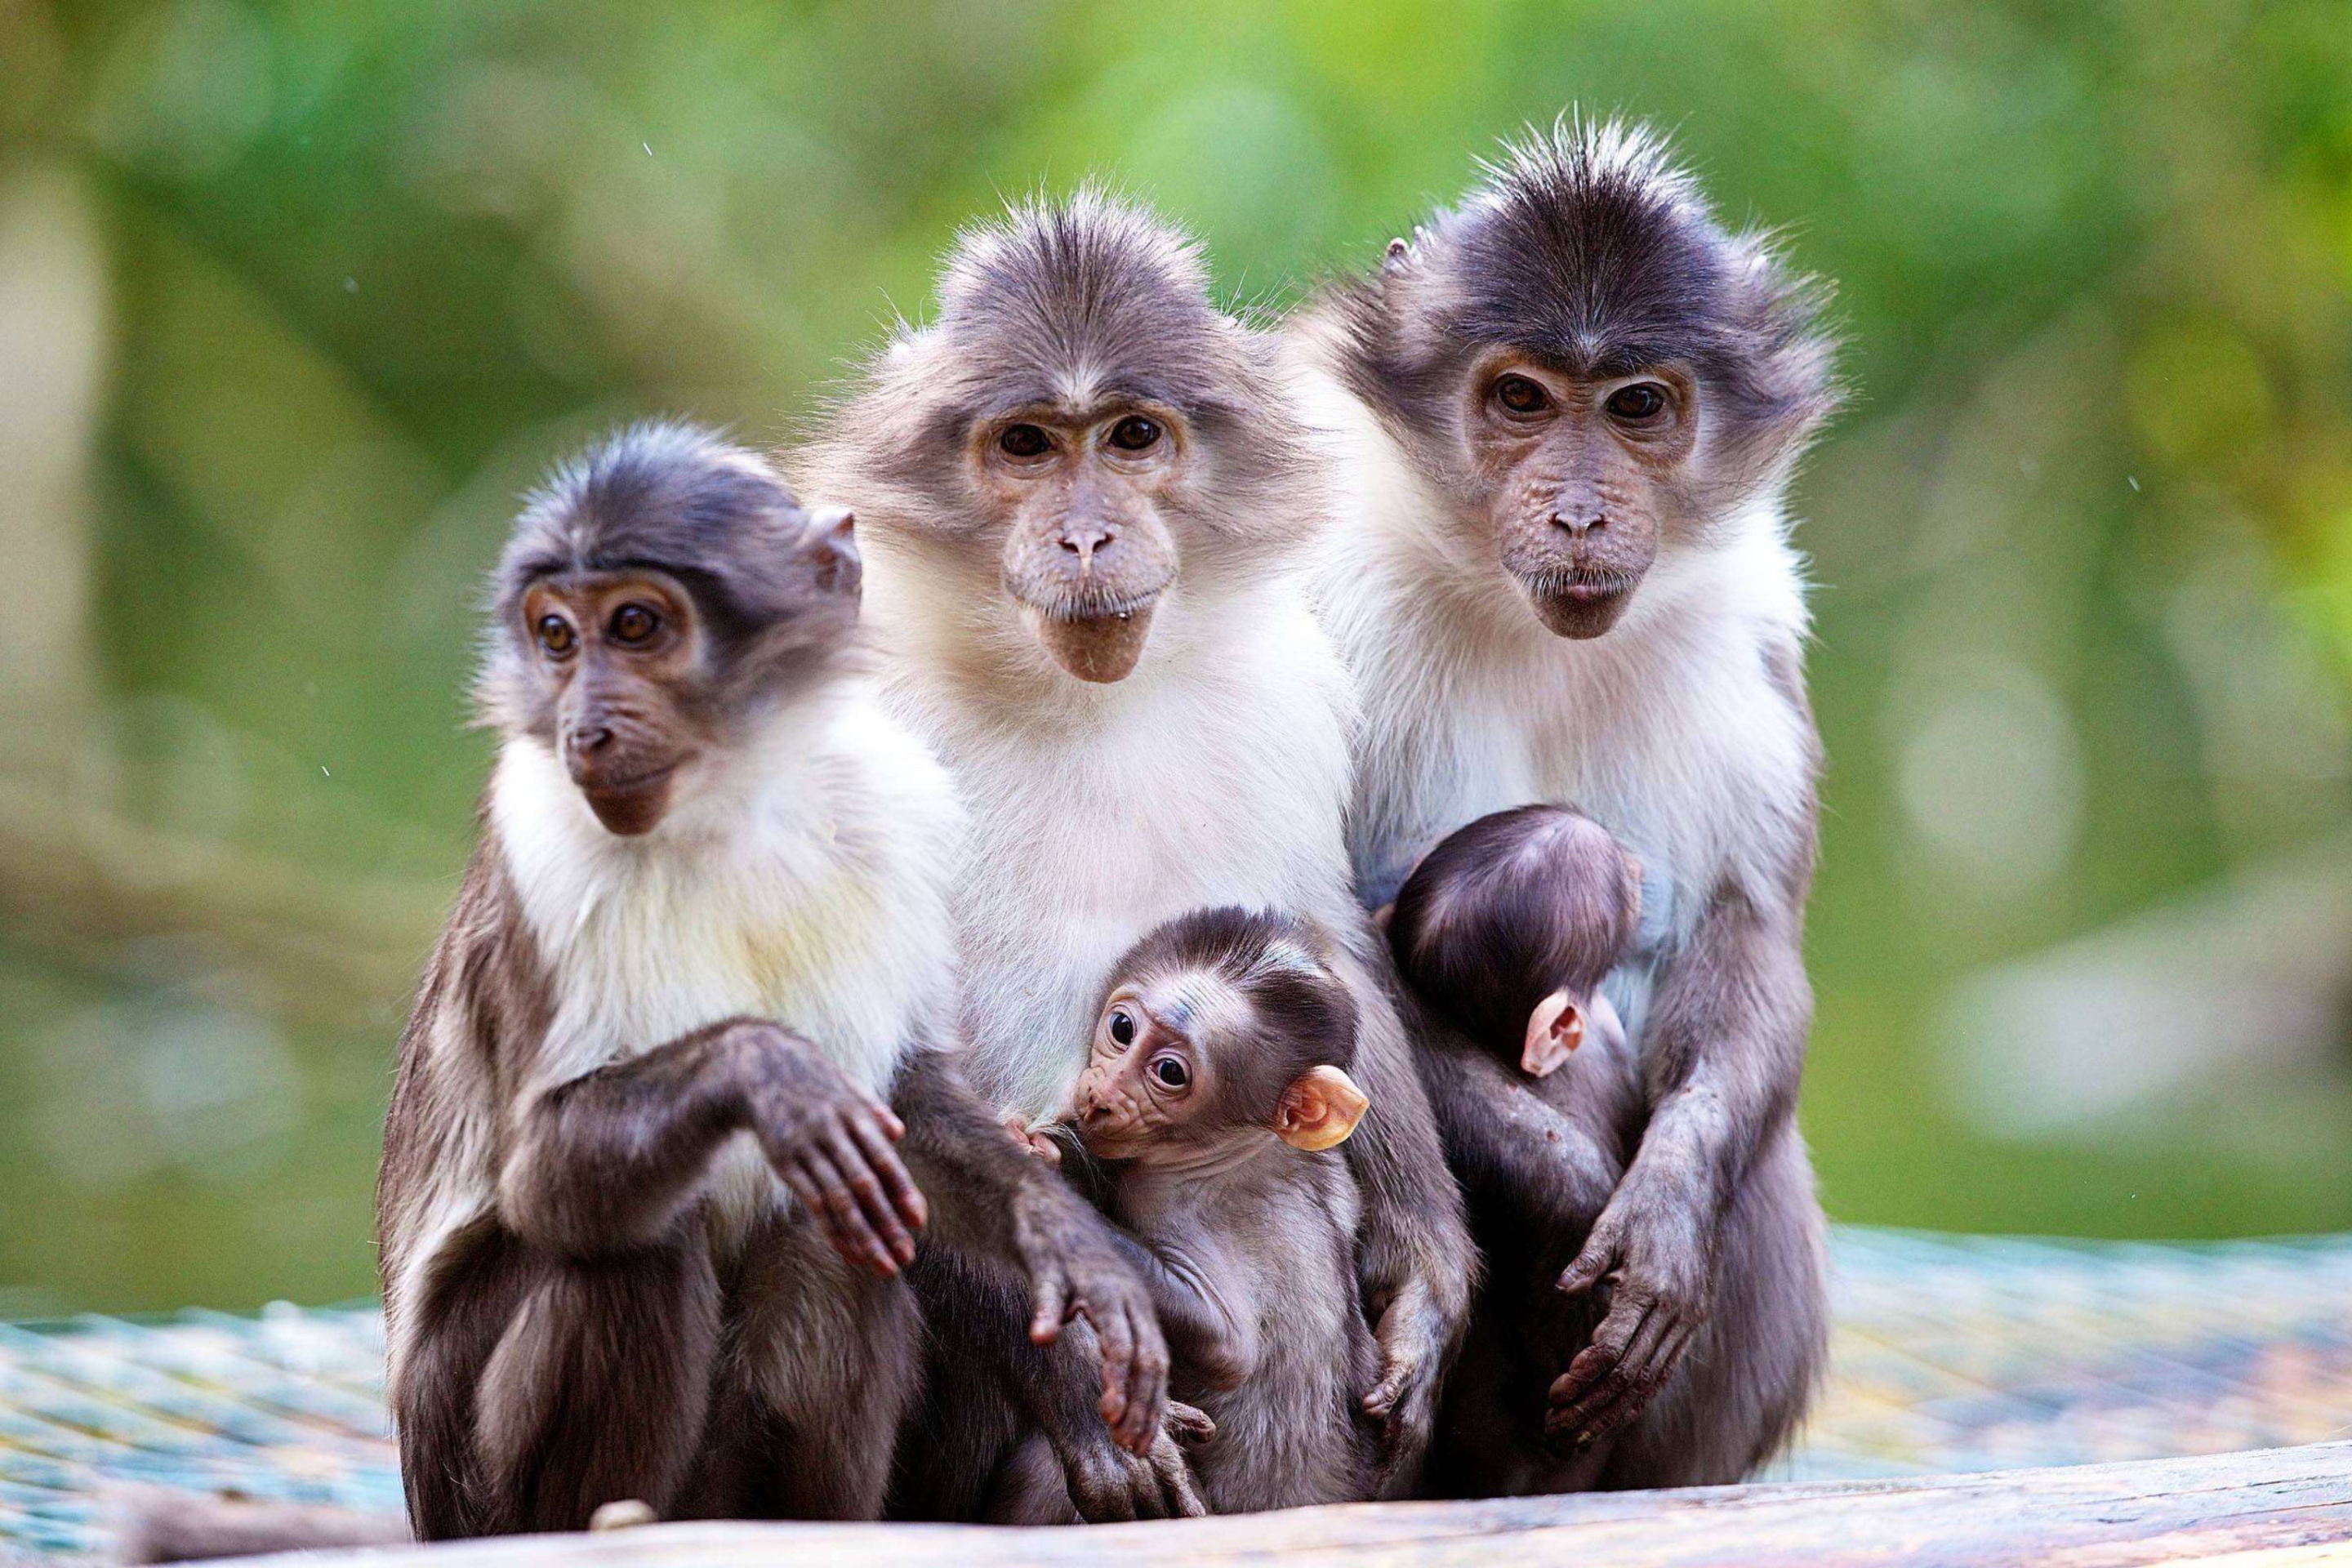 Funny Monkeys With Their Babies wallpaper 2880x1920